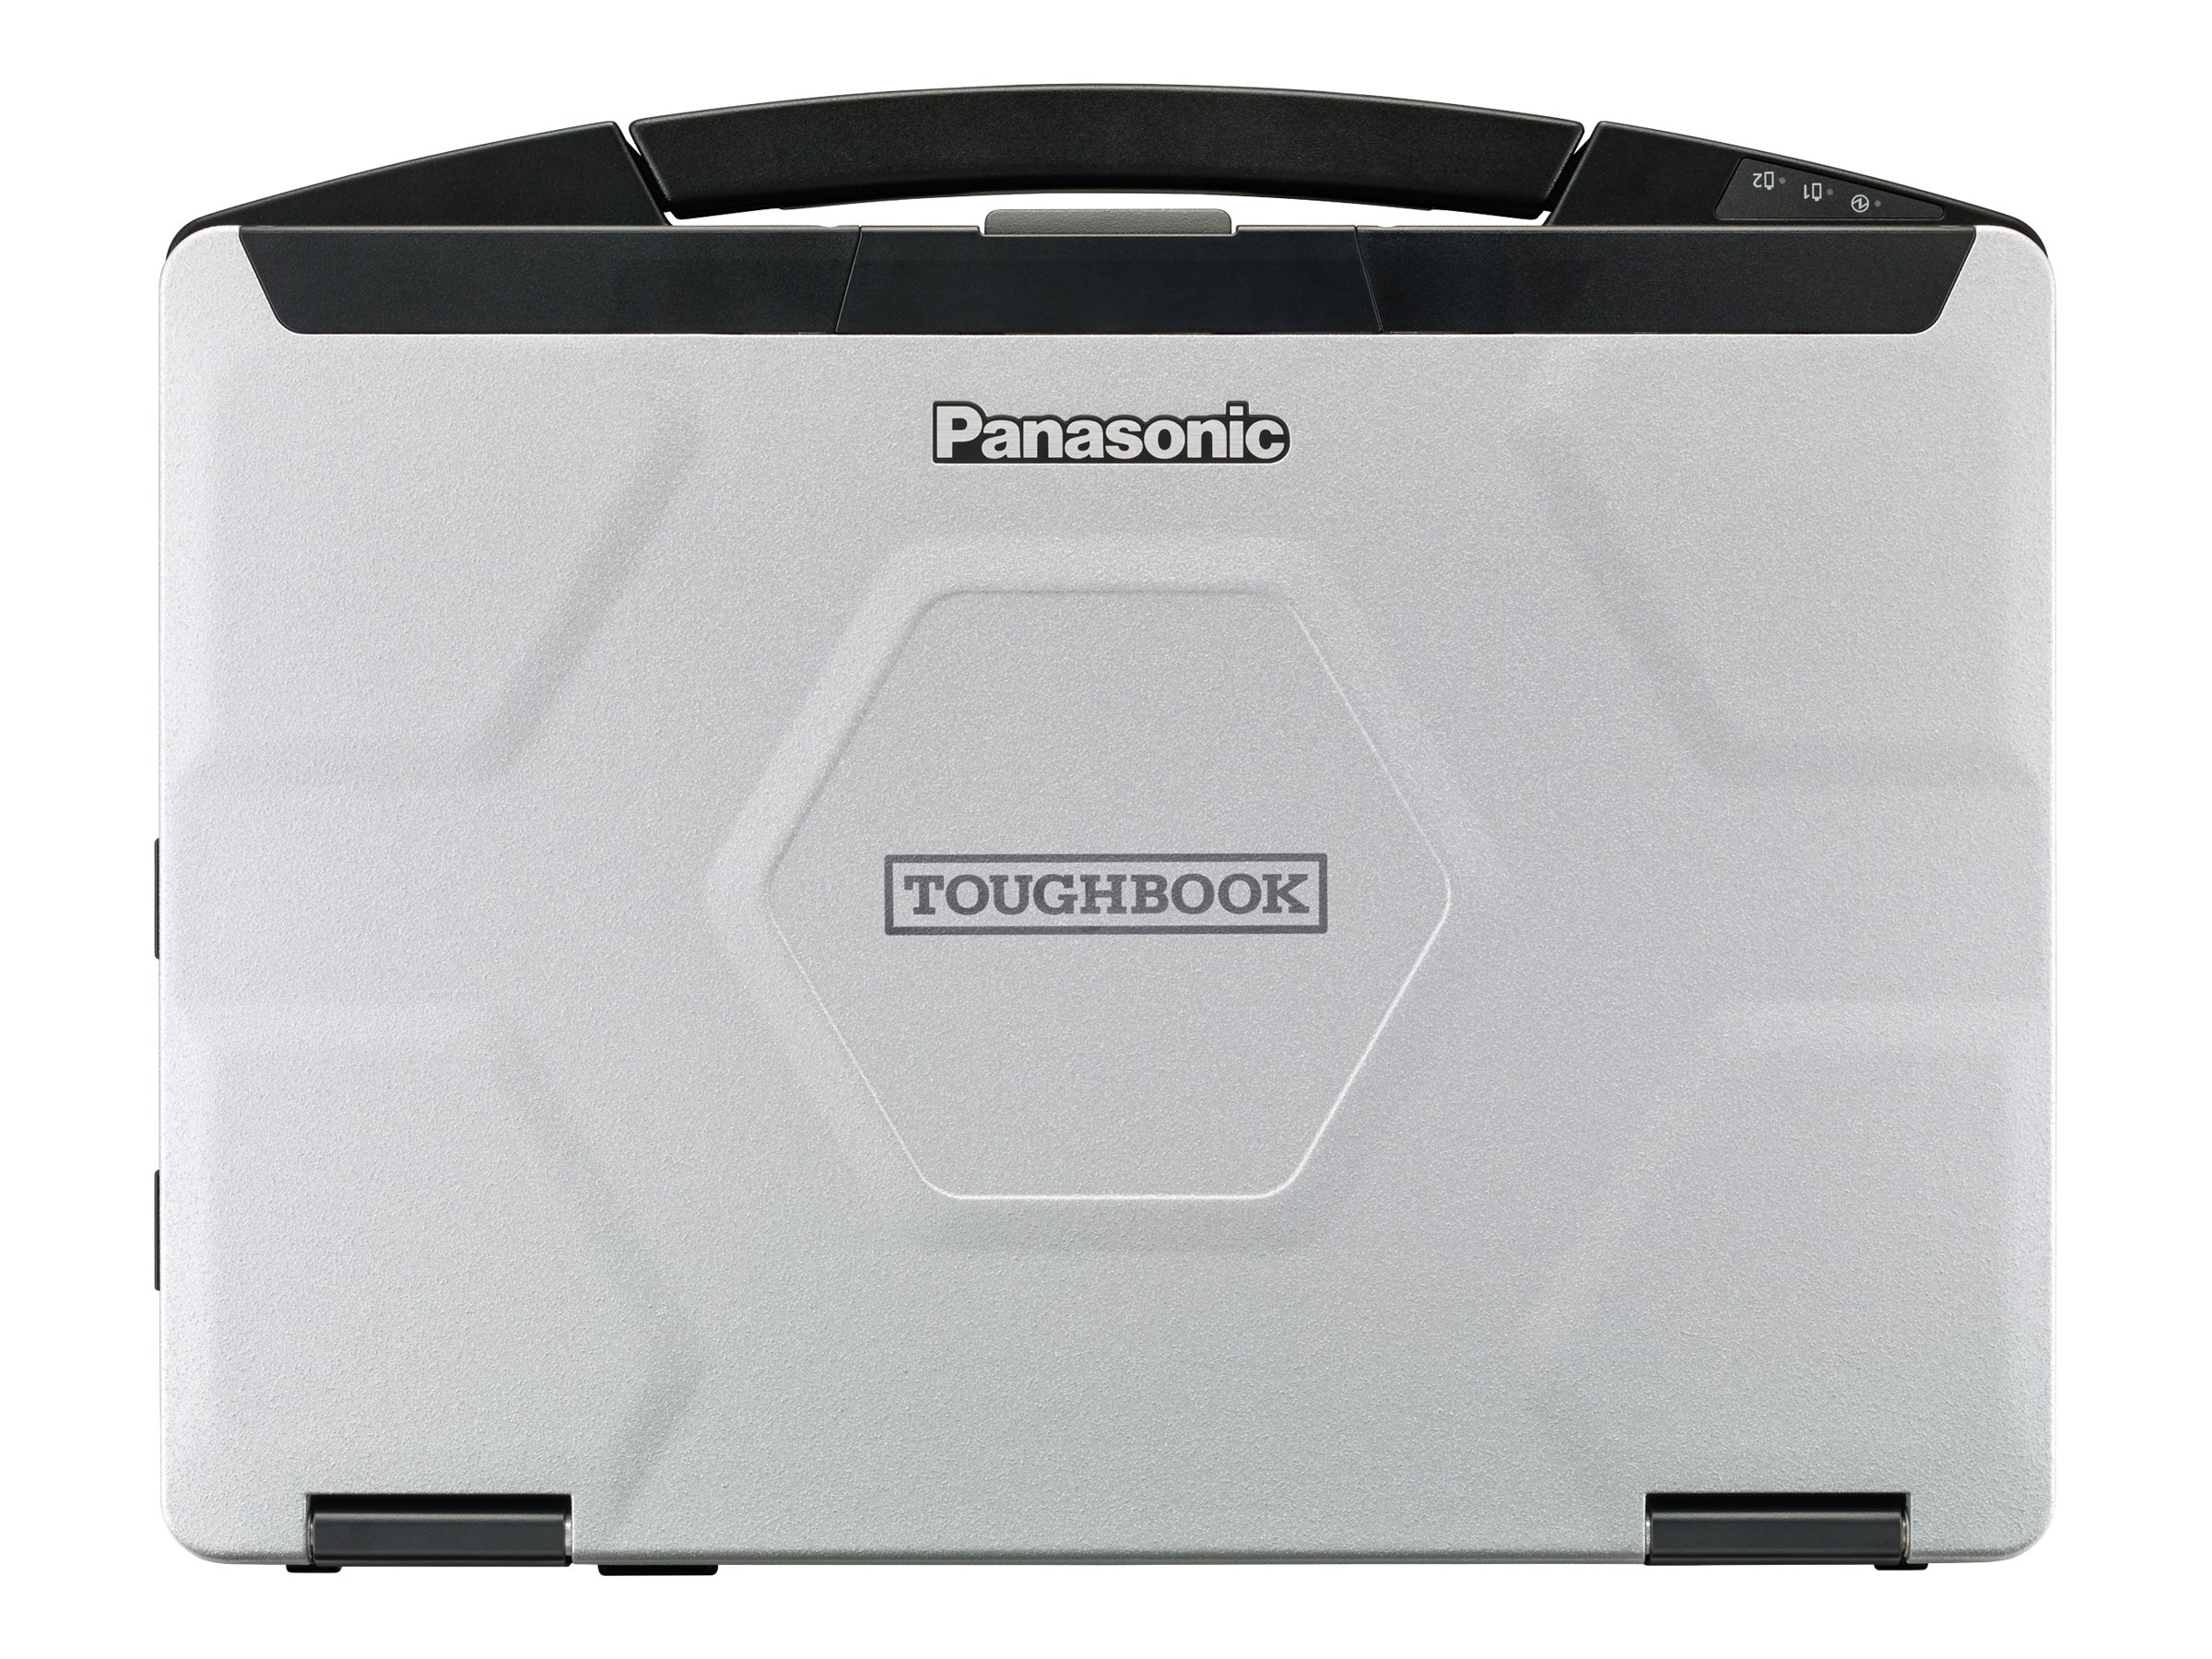 Panasonic Toughbook 54 Prime - Intel Core i5 - 7300U / up to 3.5 GHz - Win 10 Pro 64-bit - HD Graphics 620 - 8 GB RAM - 256 GB SSD - 14" 1366 x 768 (HD) - with Toughbook Preferred - image 5 of 16